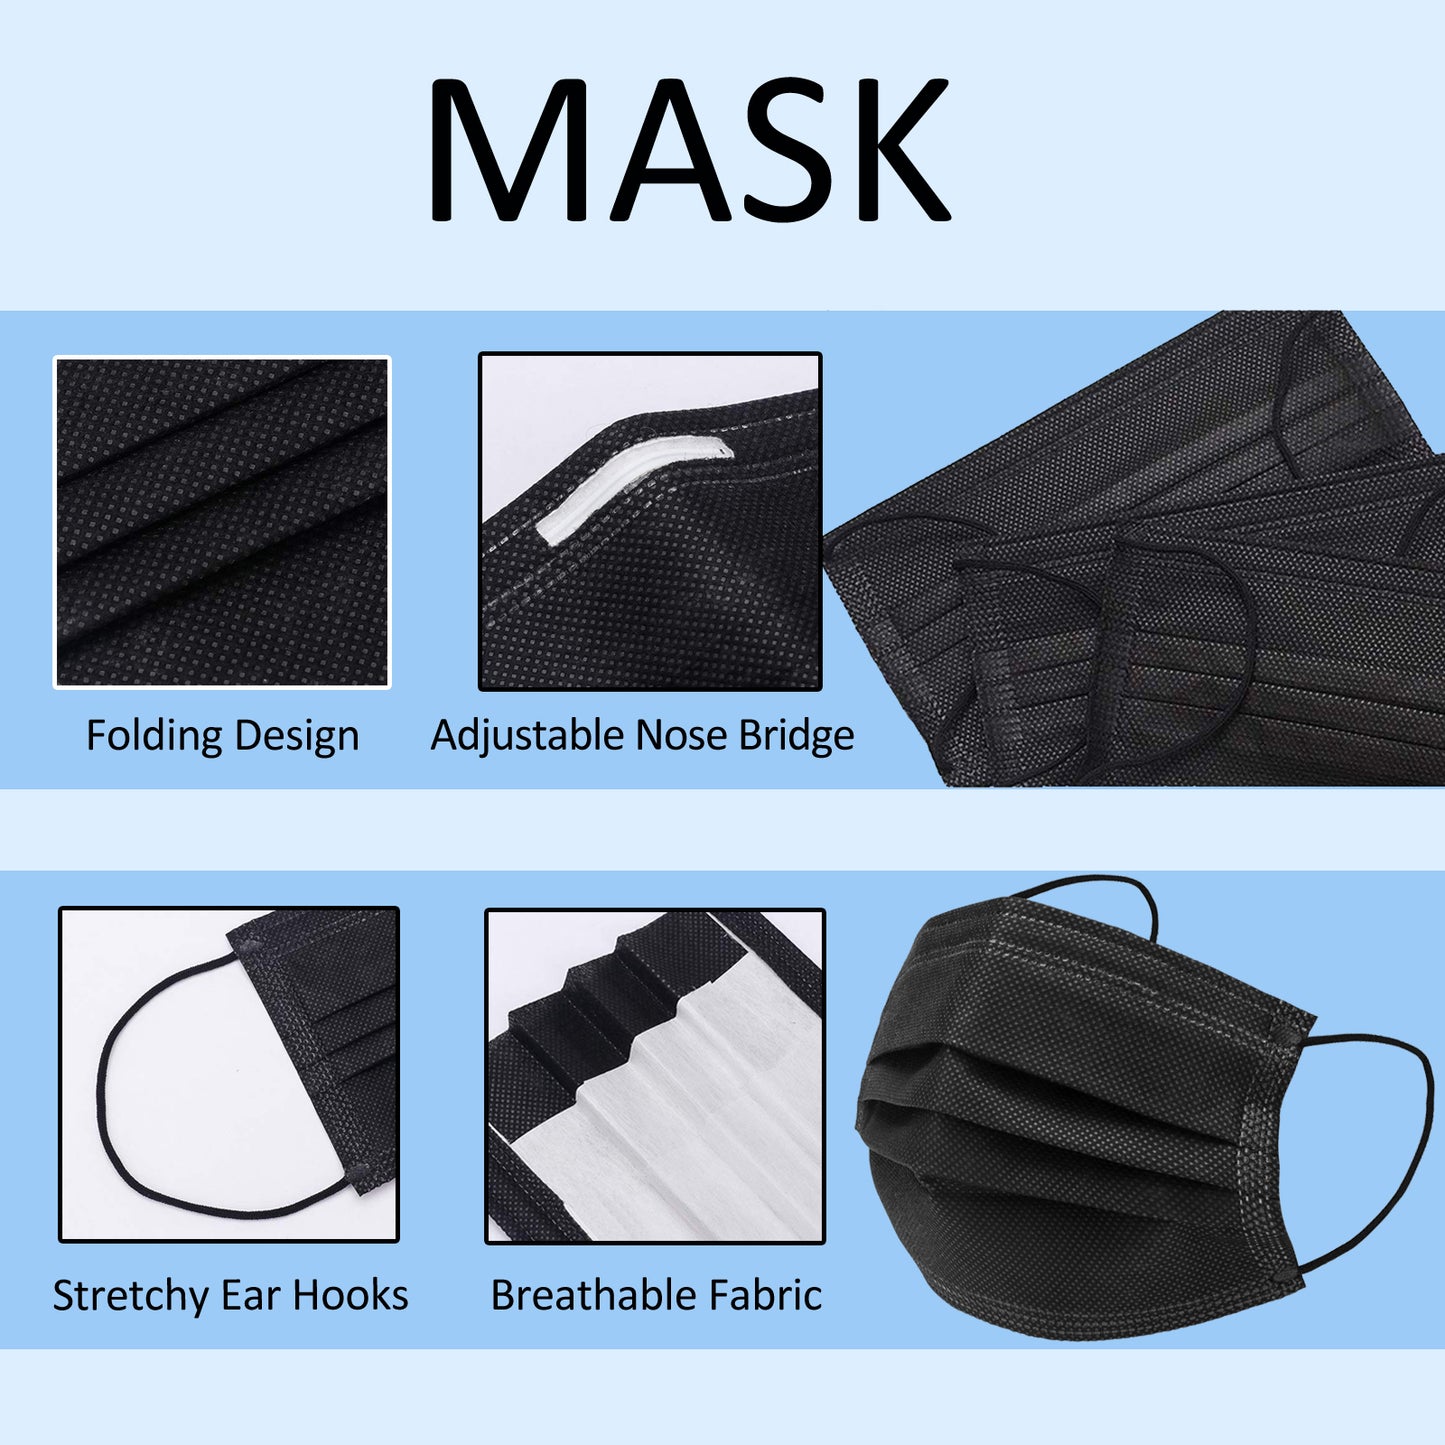 Pack of 50 Disposable Face Mask 3-Ply Breathable & Comfortable Safety Mask, Protective Masks for Indoor and Outdoor - Individually Wrapped (Black Mask)